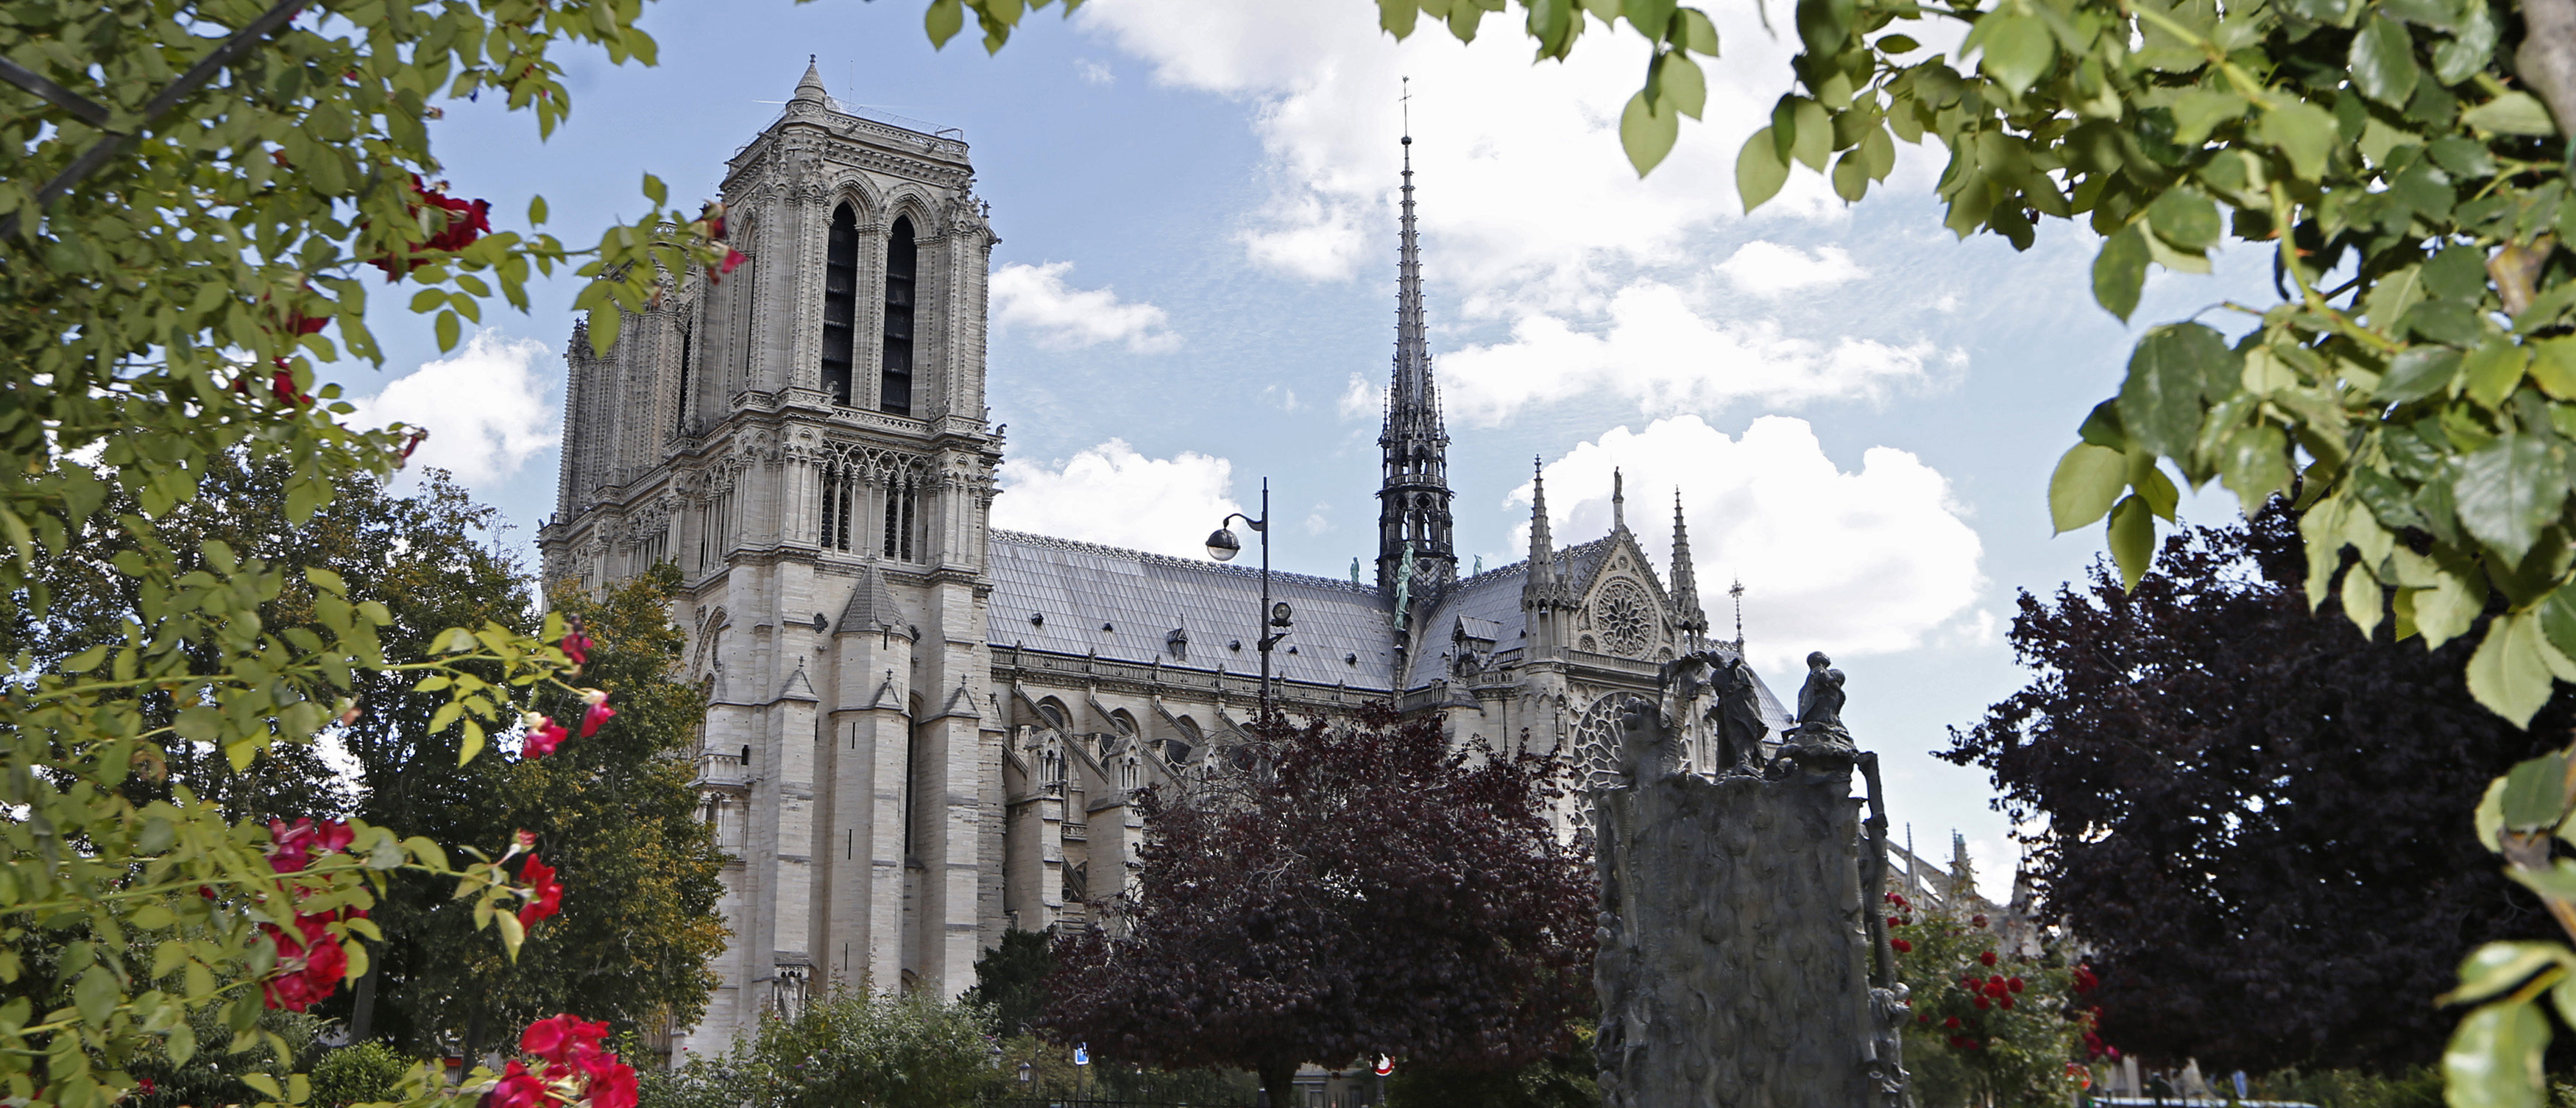 Record-Setting European Heat Wave Threatens Notre Dame, Architect Says ...